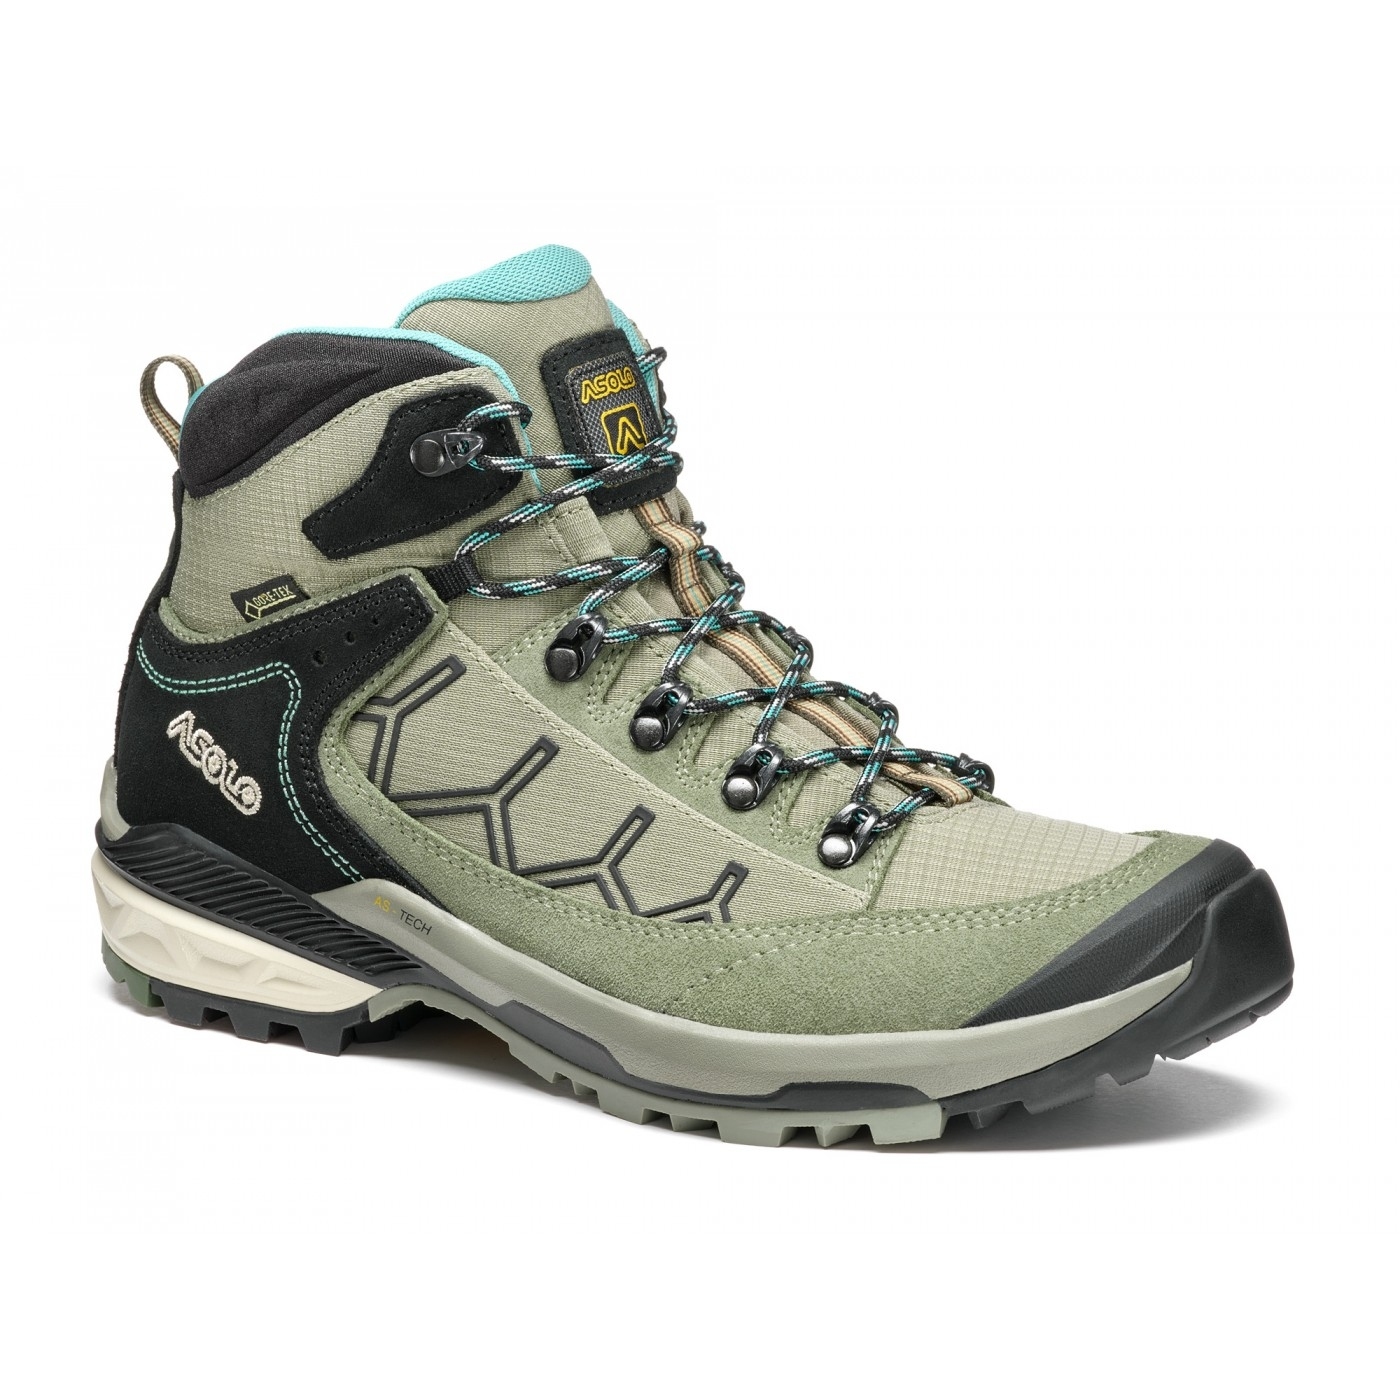 Picture of Asolo Falcon Evo GV Hiking Boots Women - dry weeds/aqua green